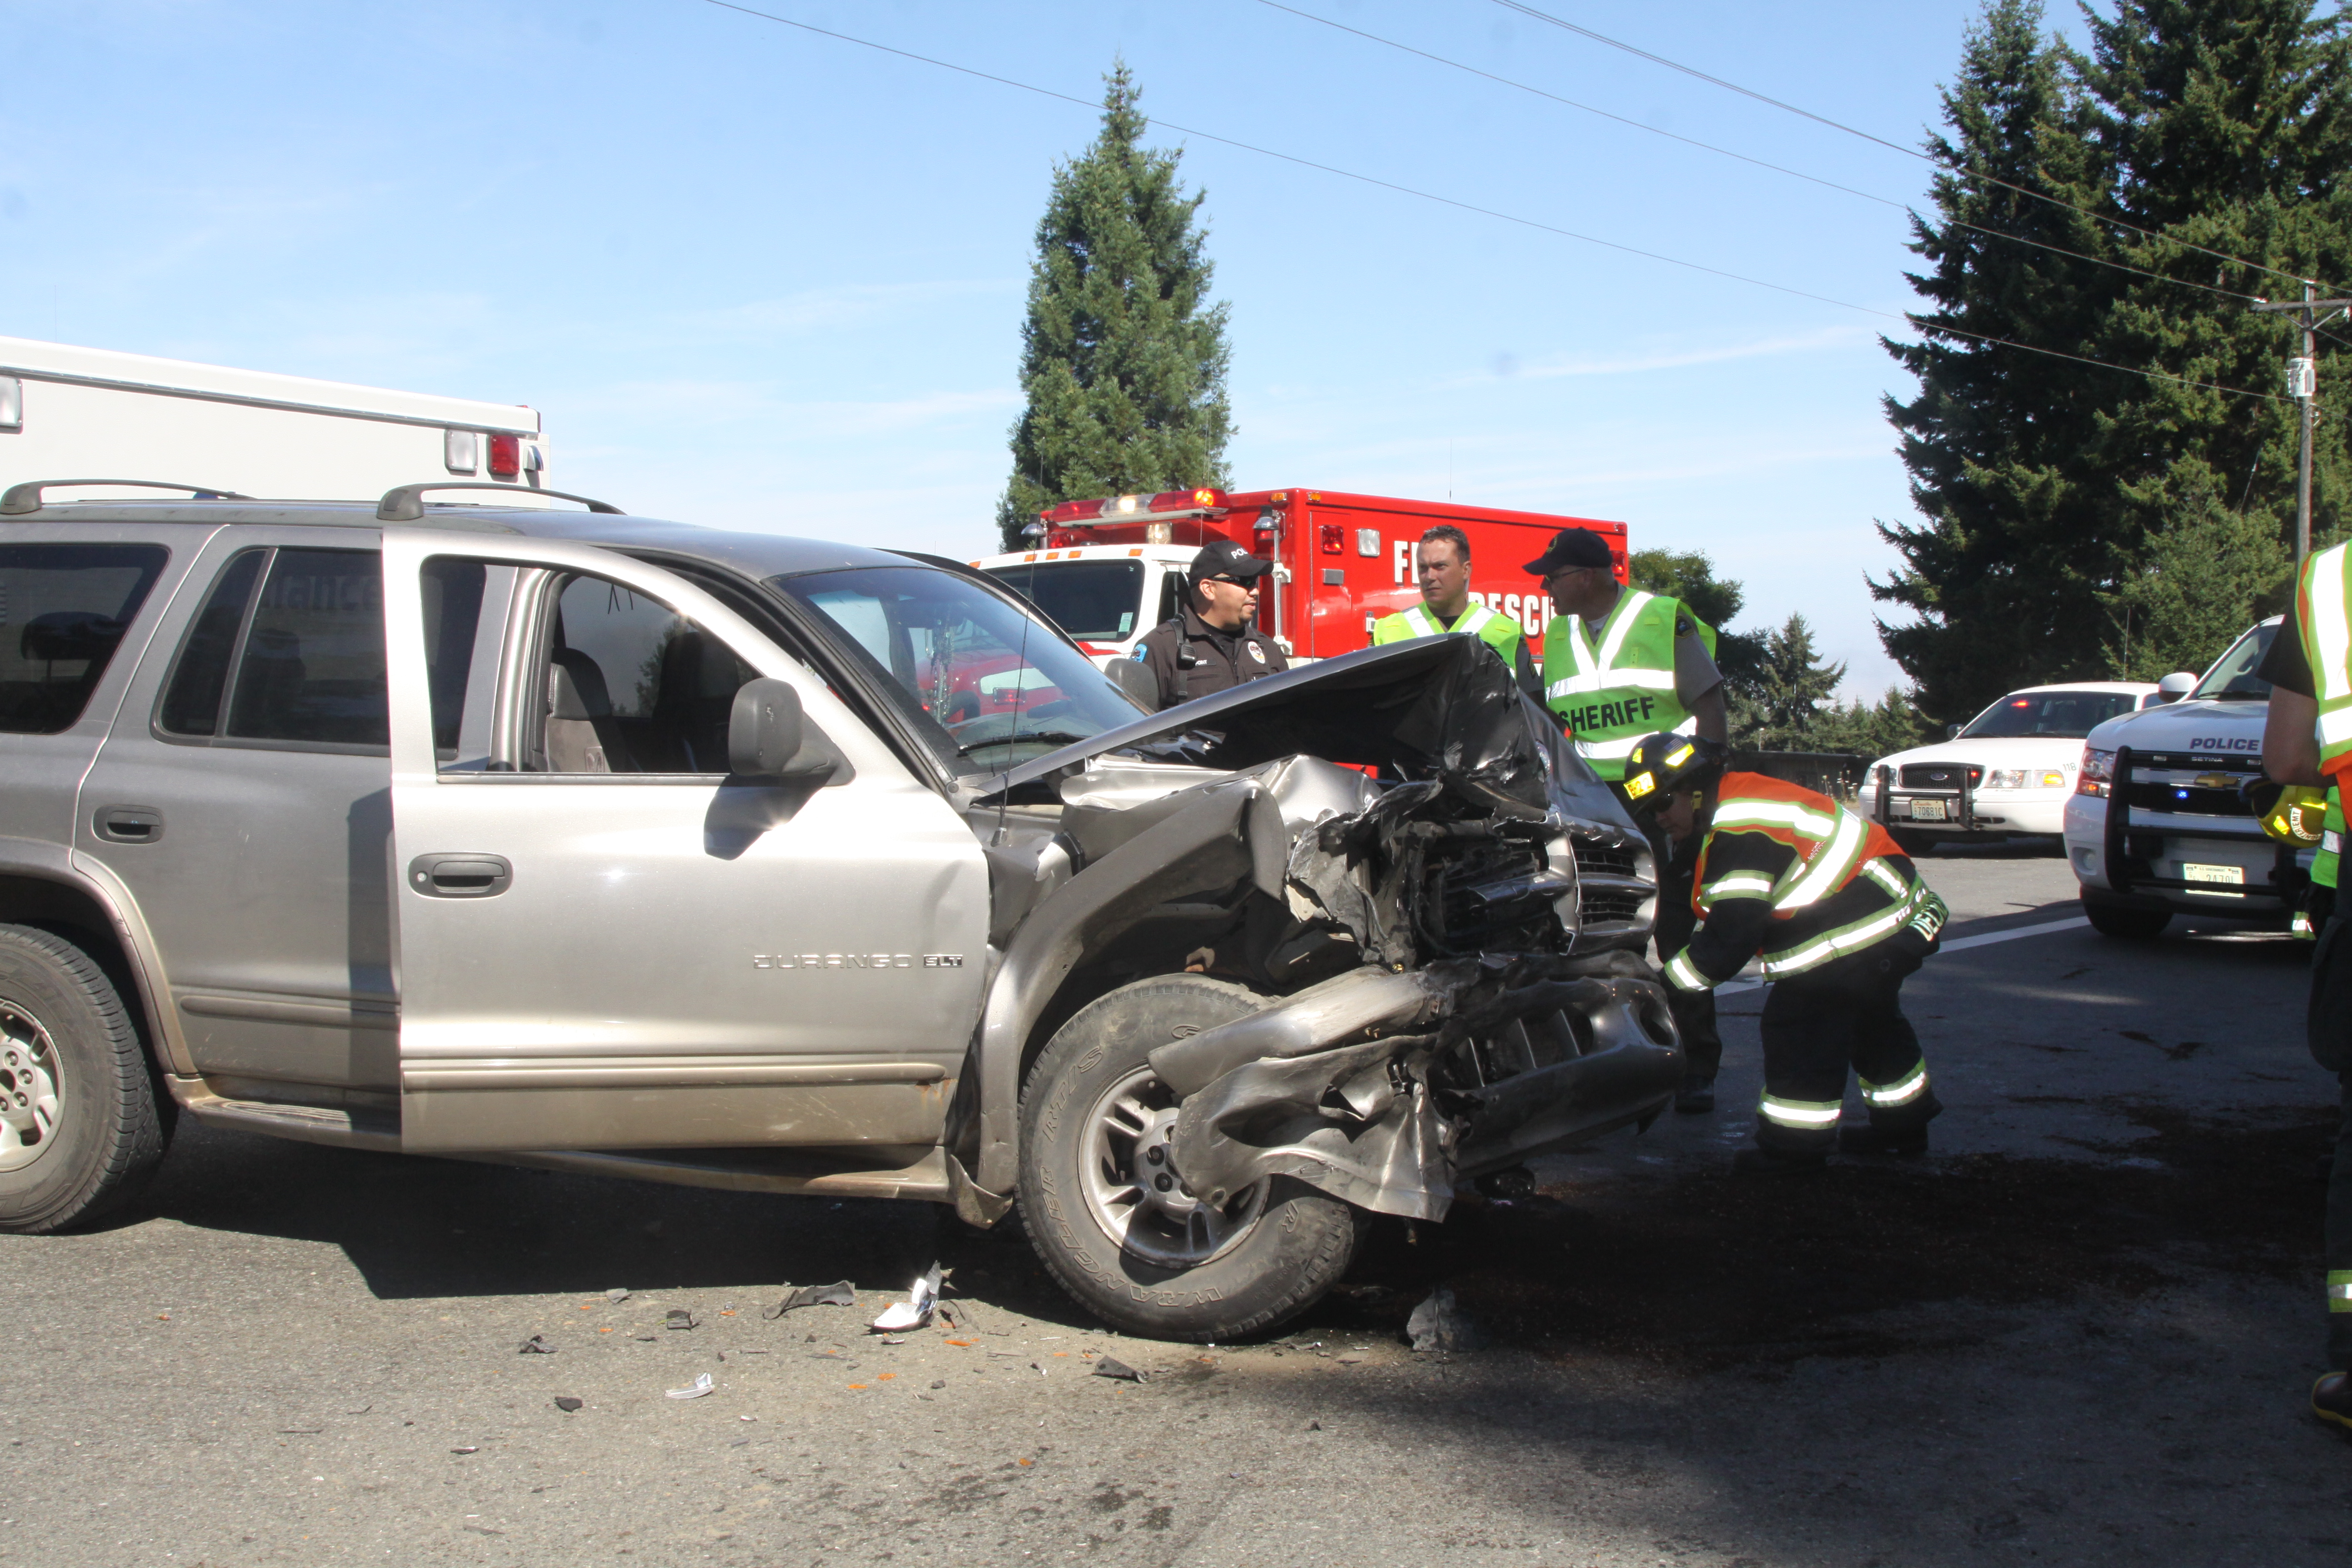 Emergency crews respond to the scene of Sunday's collision at the junction of Highways 101 and 112 west of Port Angeles. Dave Logan/for Peninsula Daily News